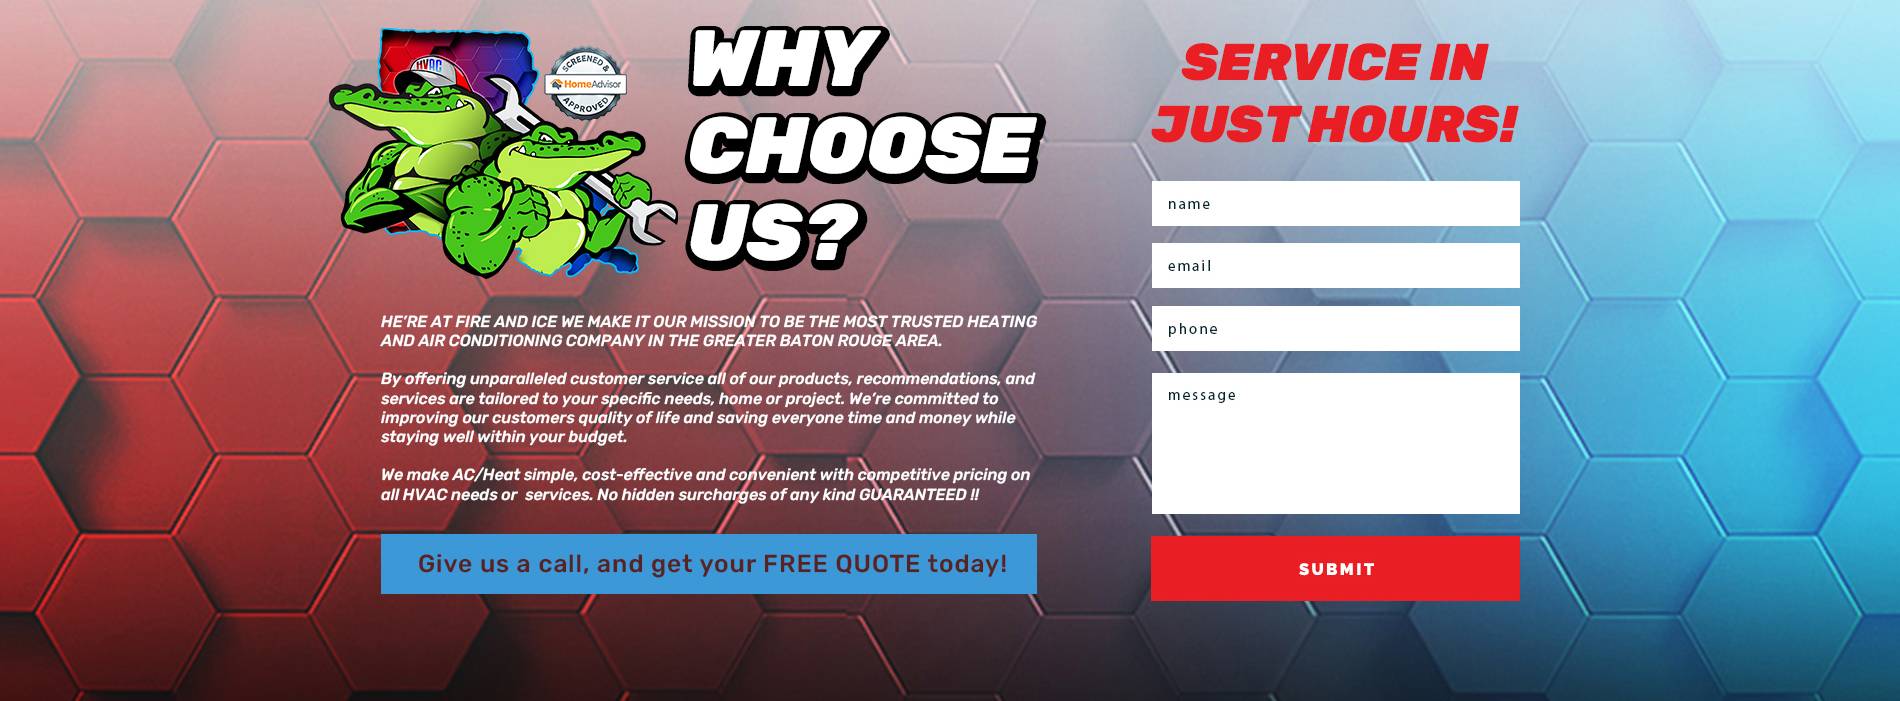 Why Choose Us service in just hours